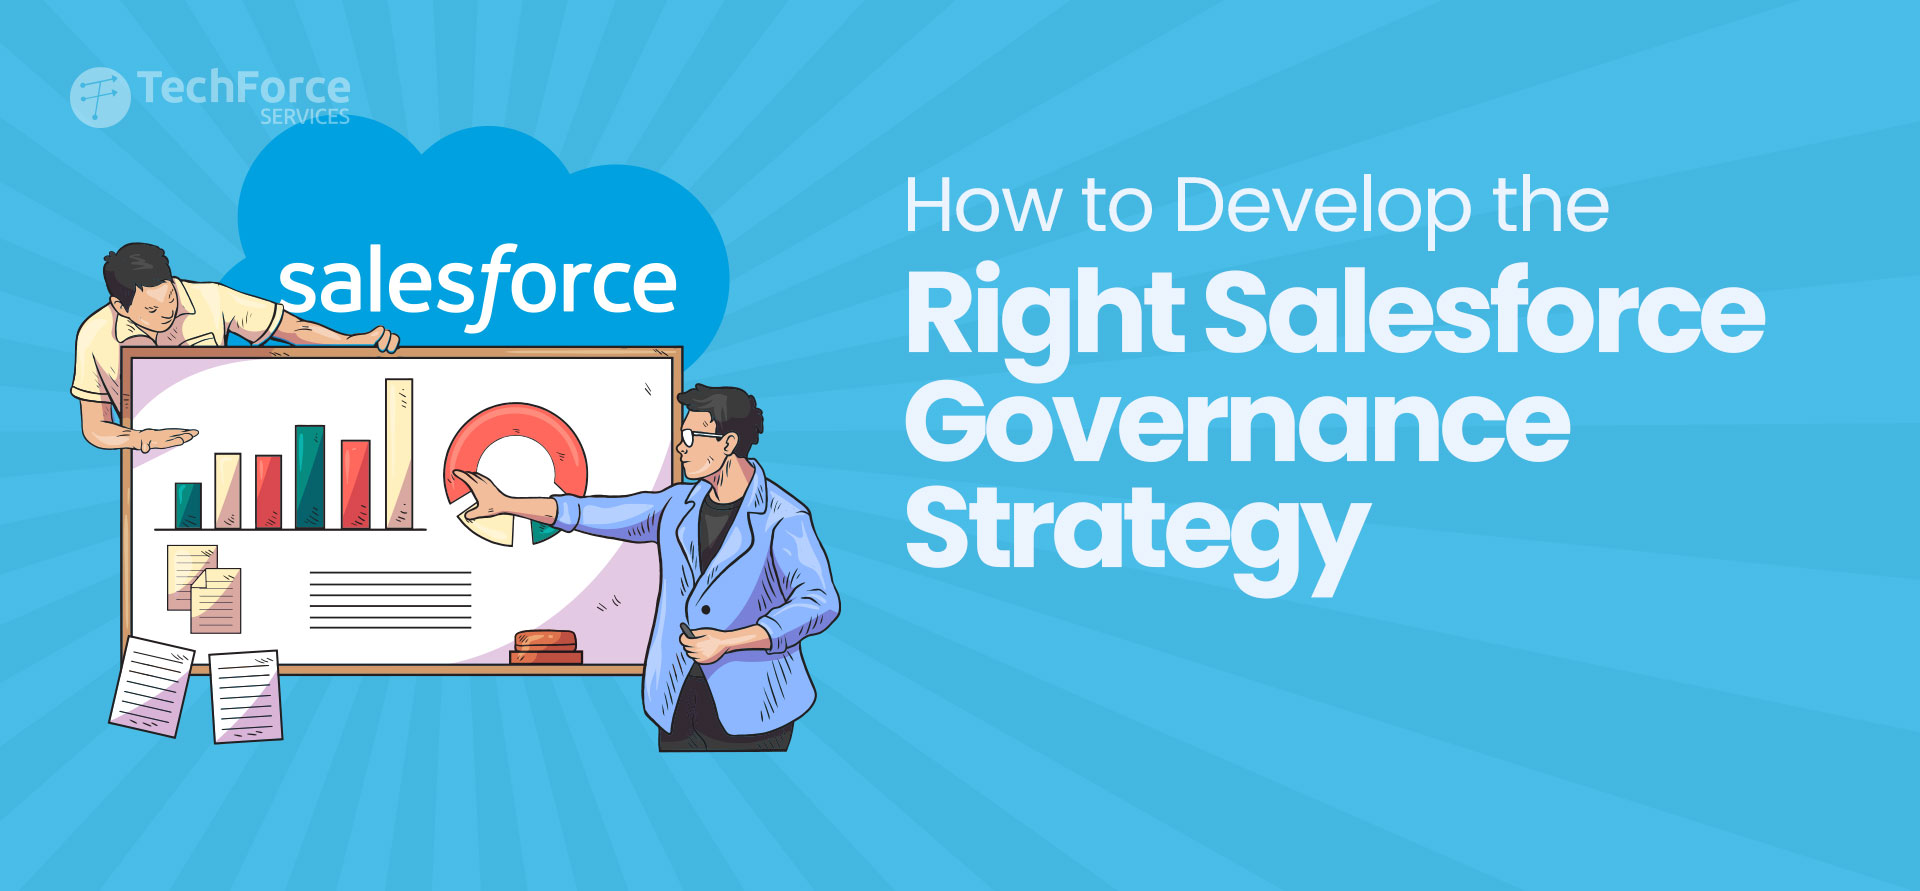 How-to-Develop-the-Right-Salesforce-Governance-Strategy